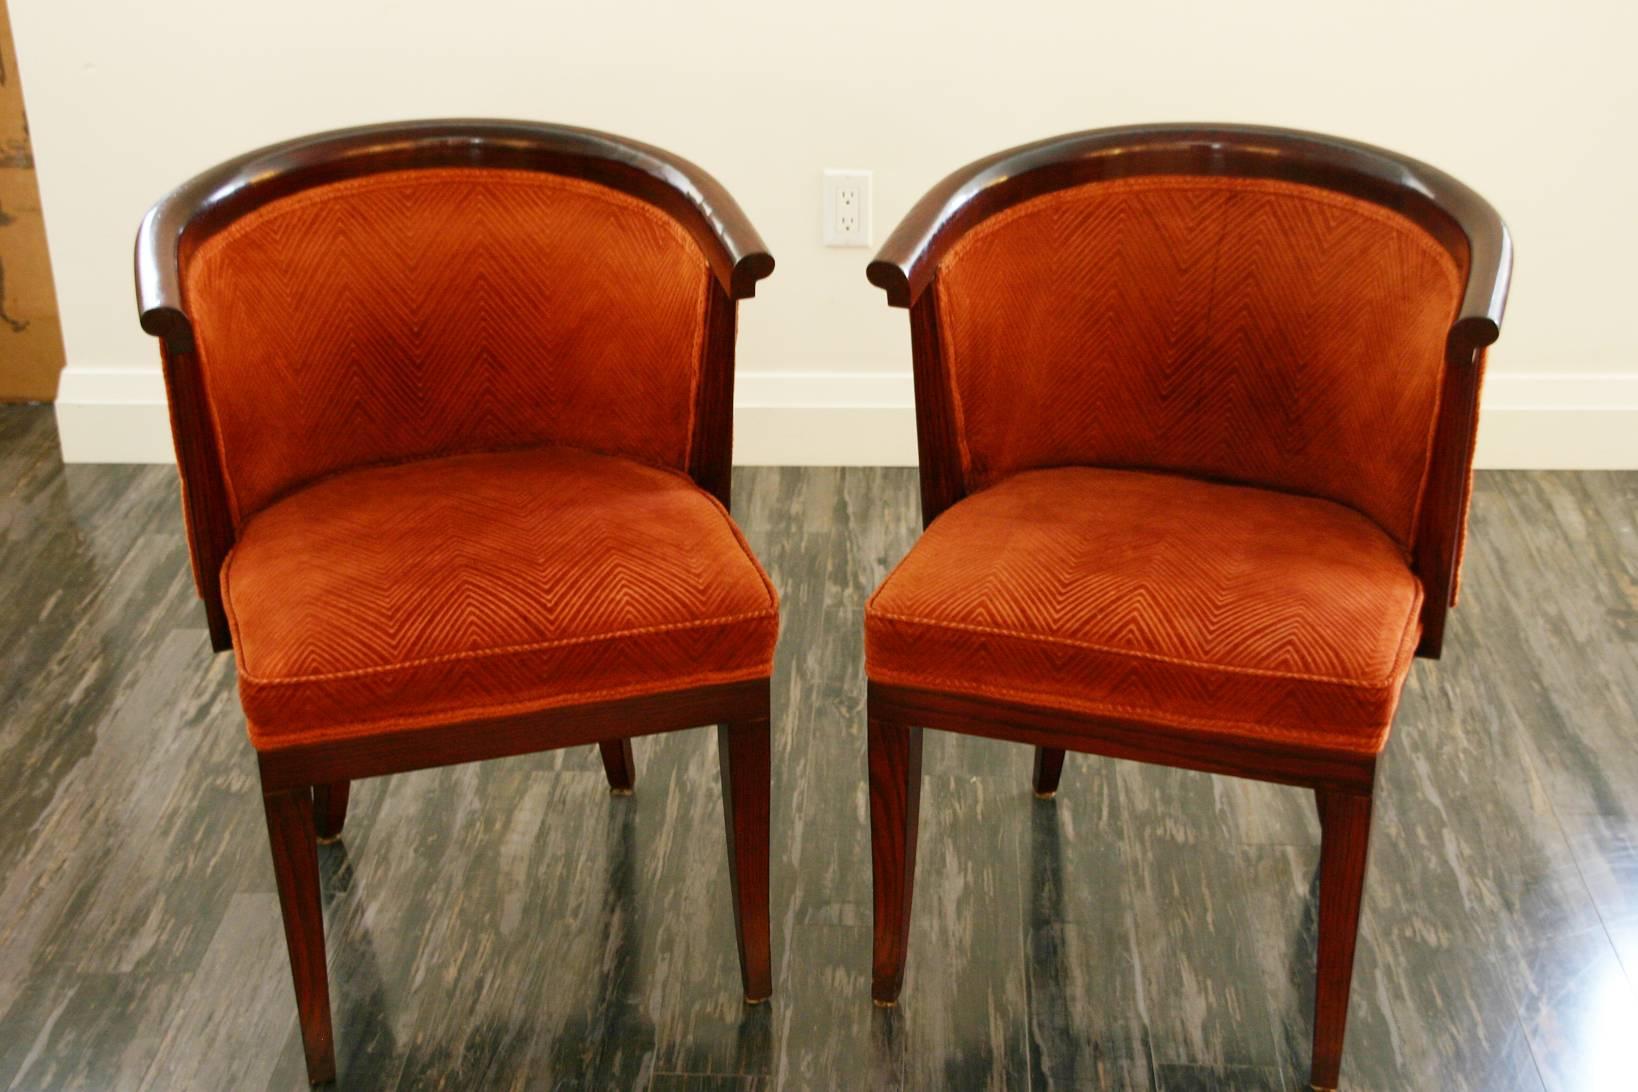 A Set of Ten 1950's Harold Schwartz for Romweber Tub Shaped Dining Chairs consisting of two armchairs and eight sidechairs